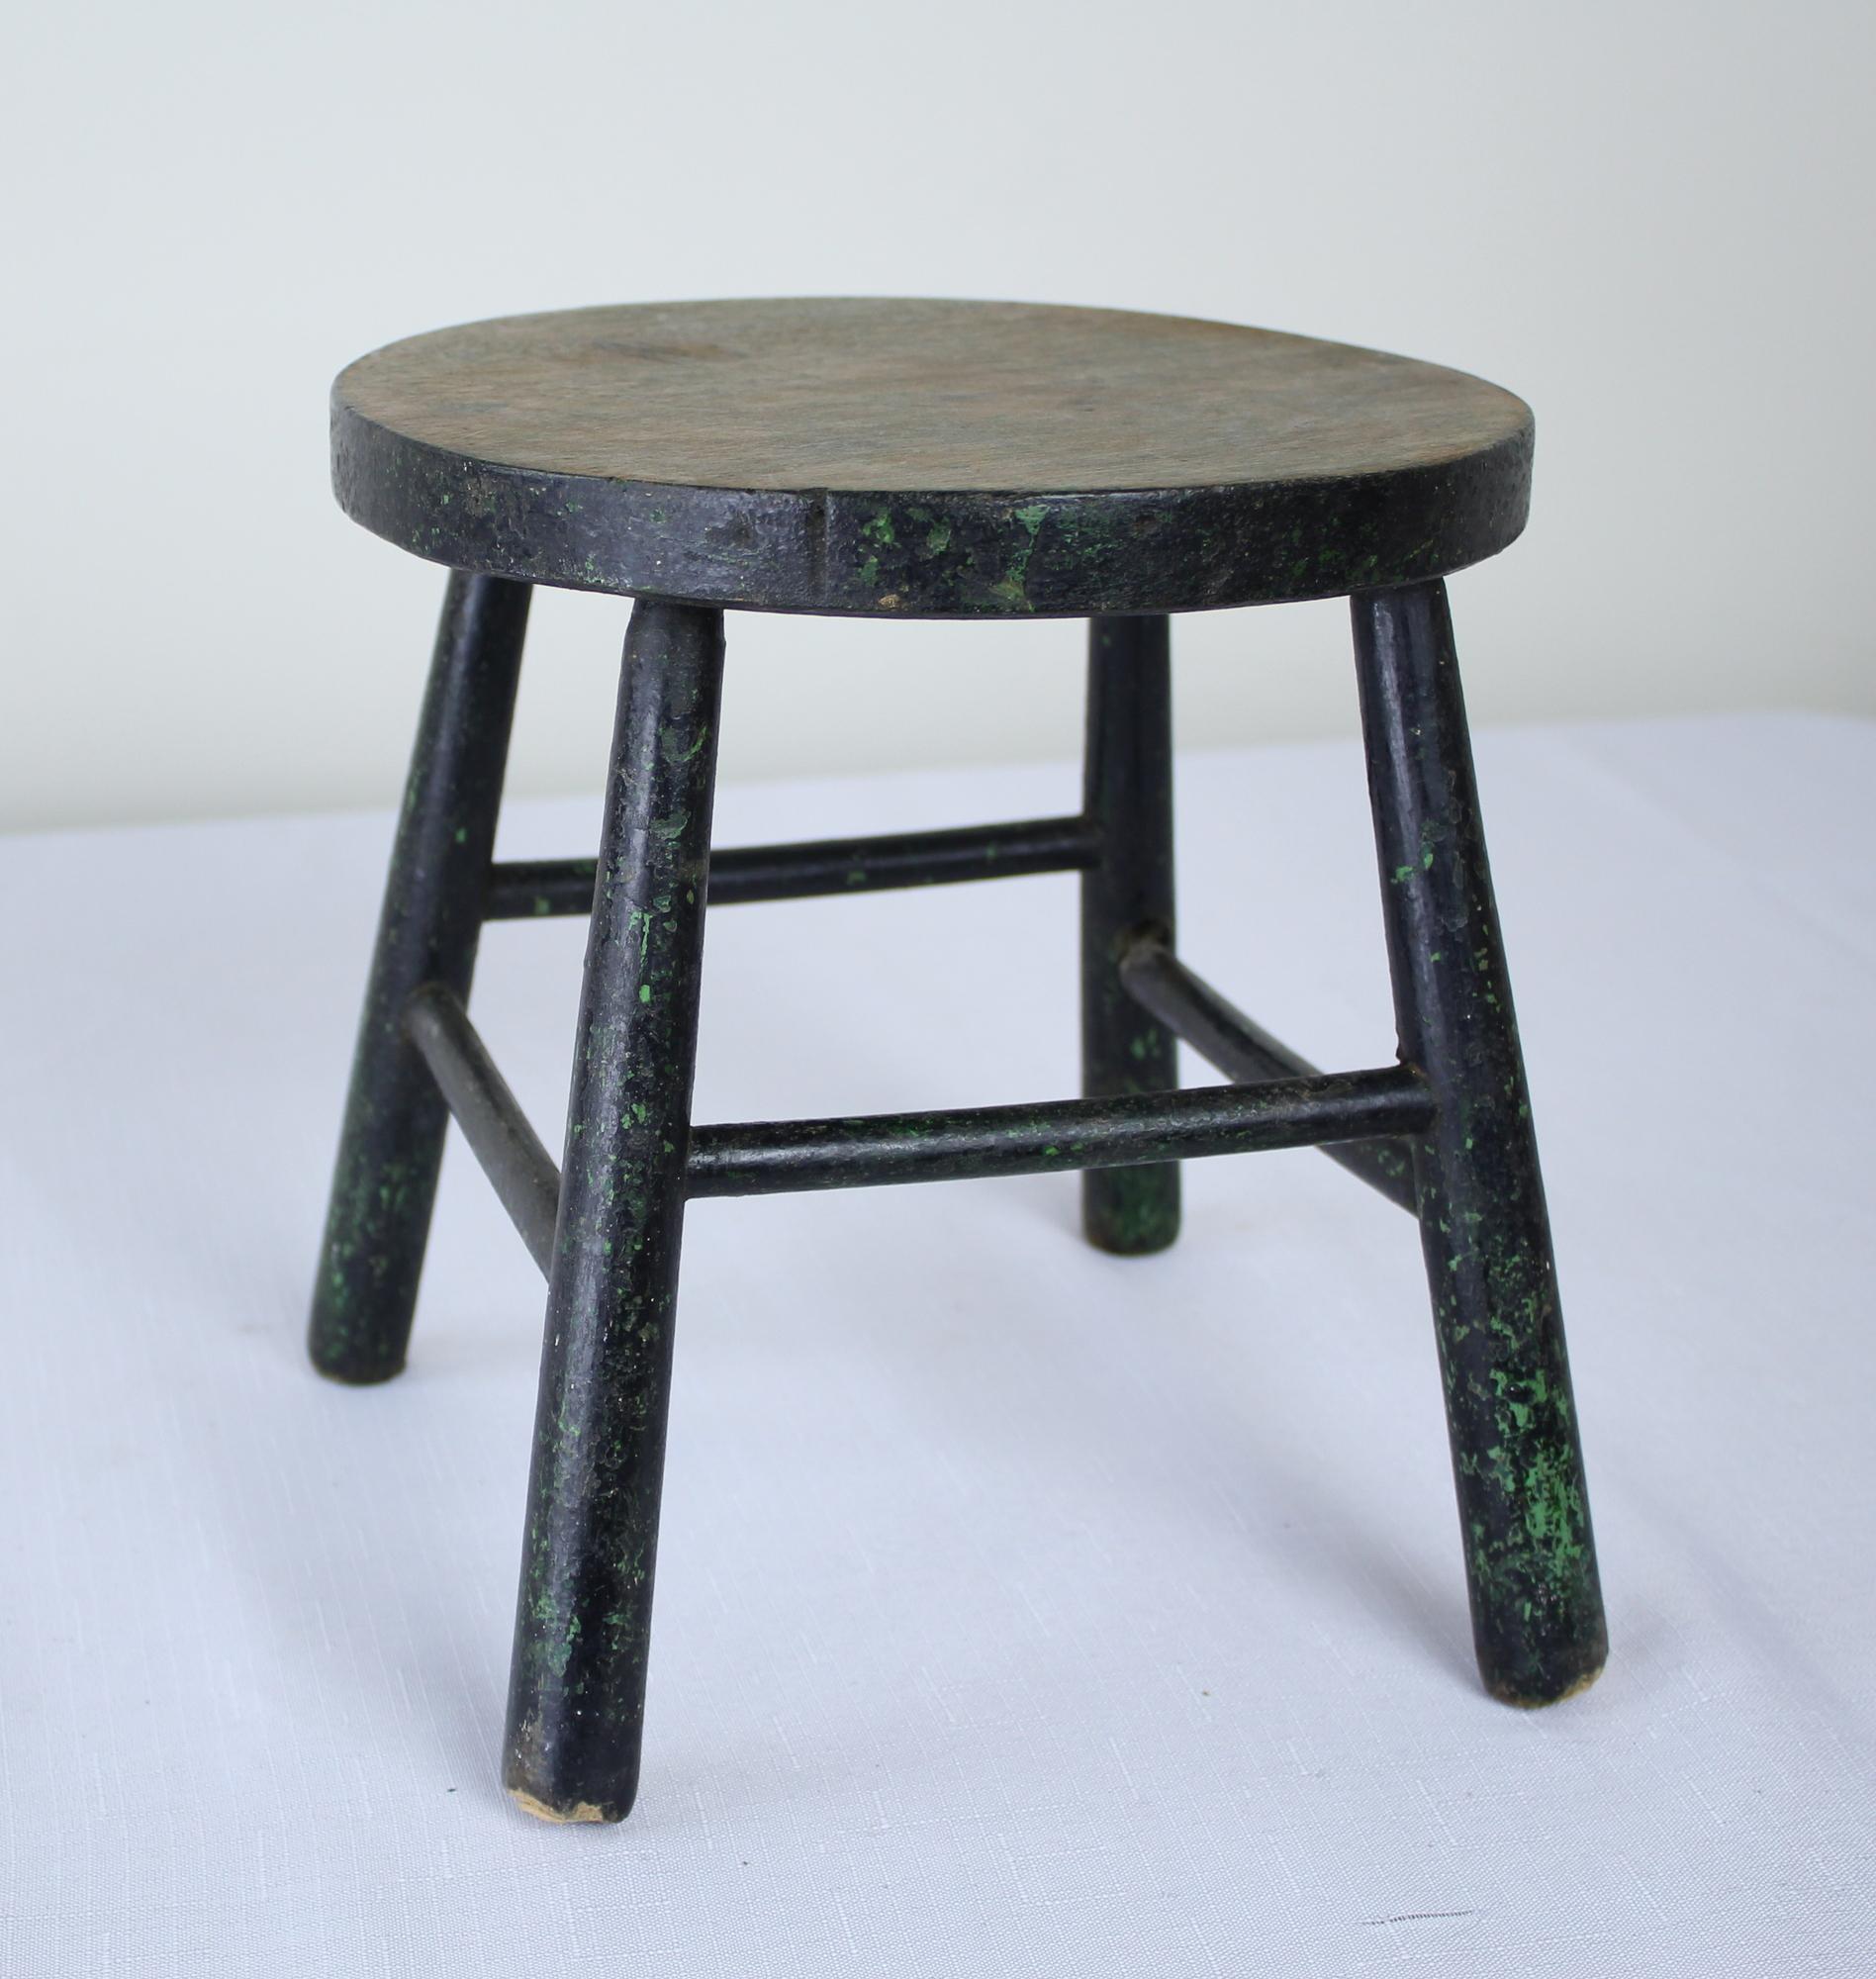 A small four-legged stool with its original distressed green paint. While this small piece used to make its home in the barn, it would be ideal as a fireside perch for a child or one's cocktail.